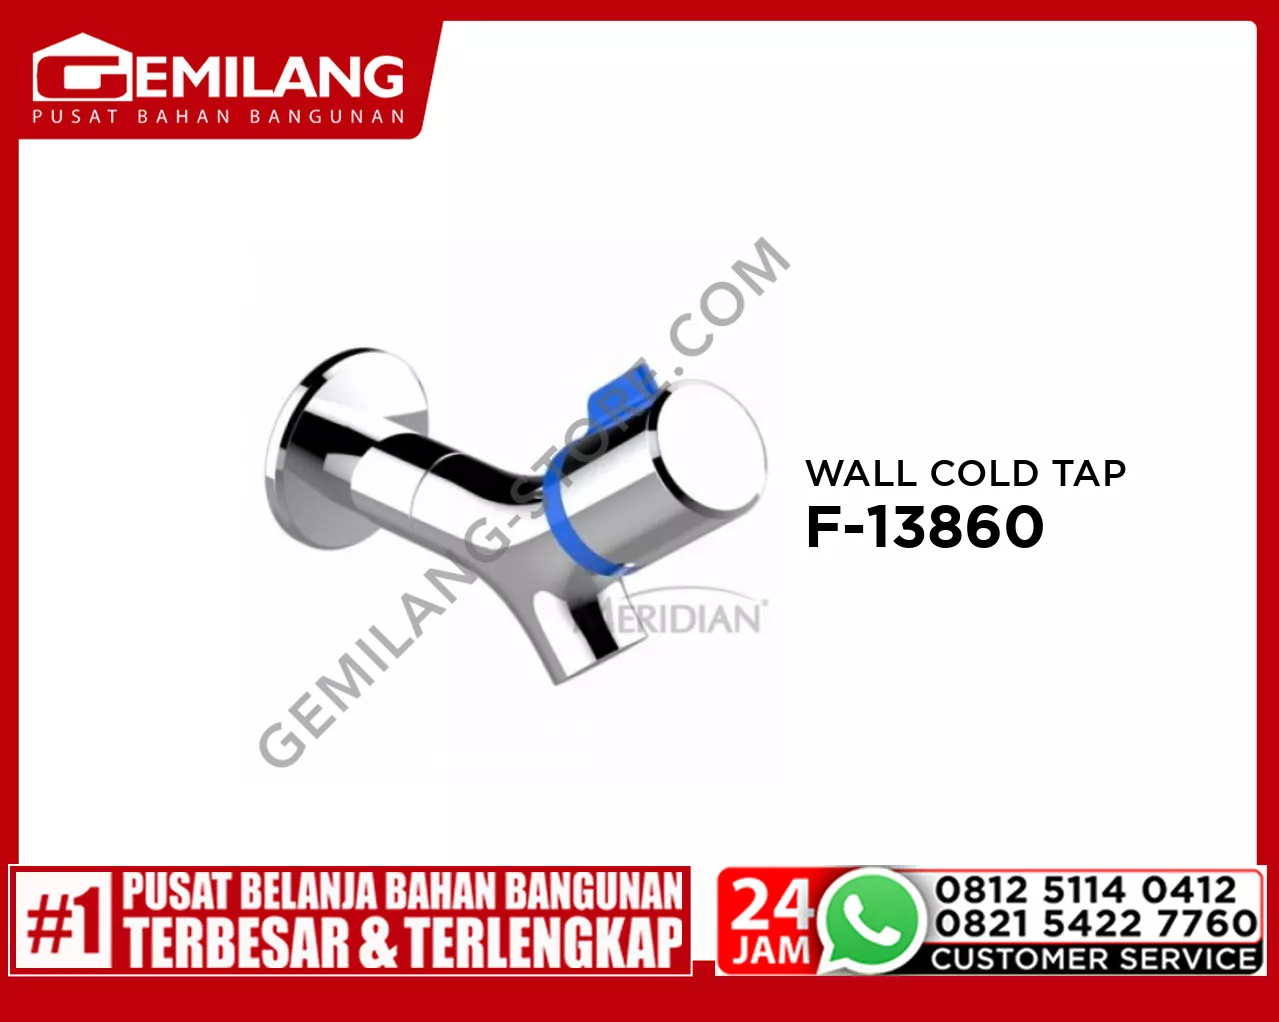 MERIDIAN WALL COLD TAP F-13860